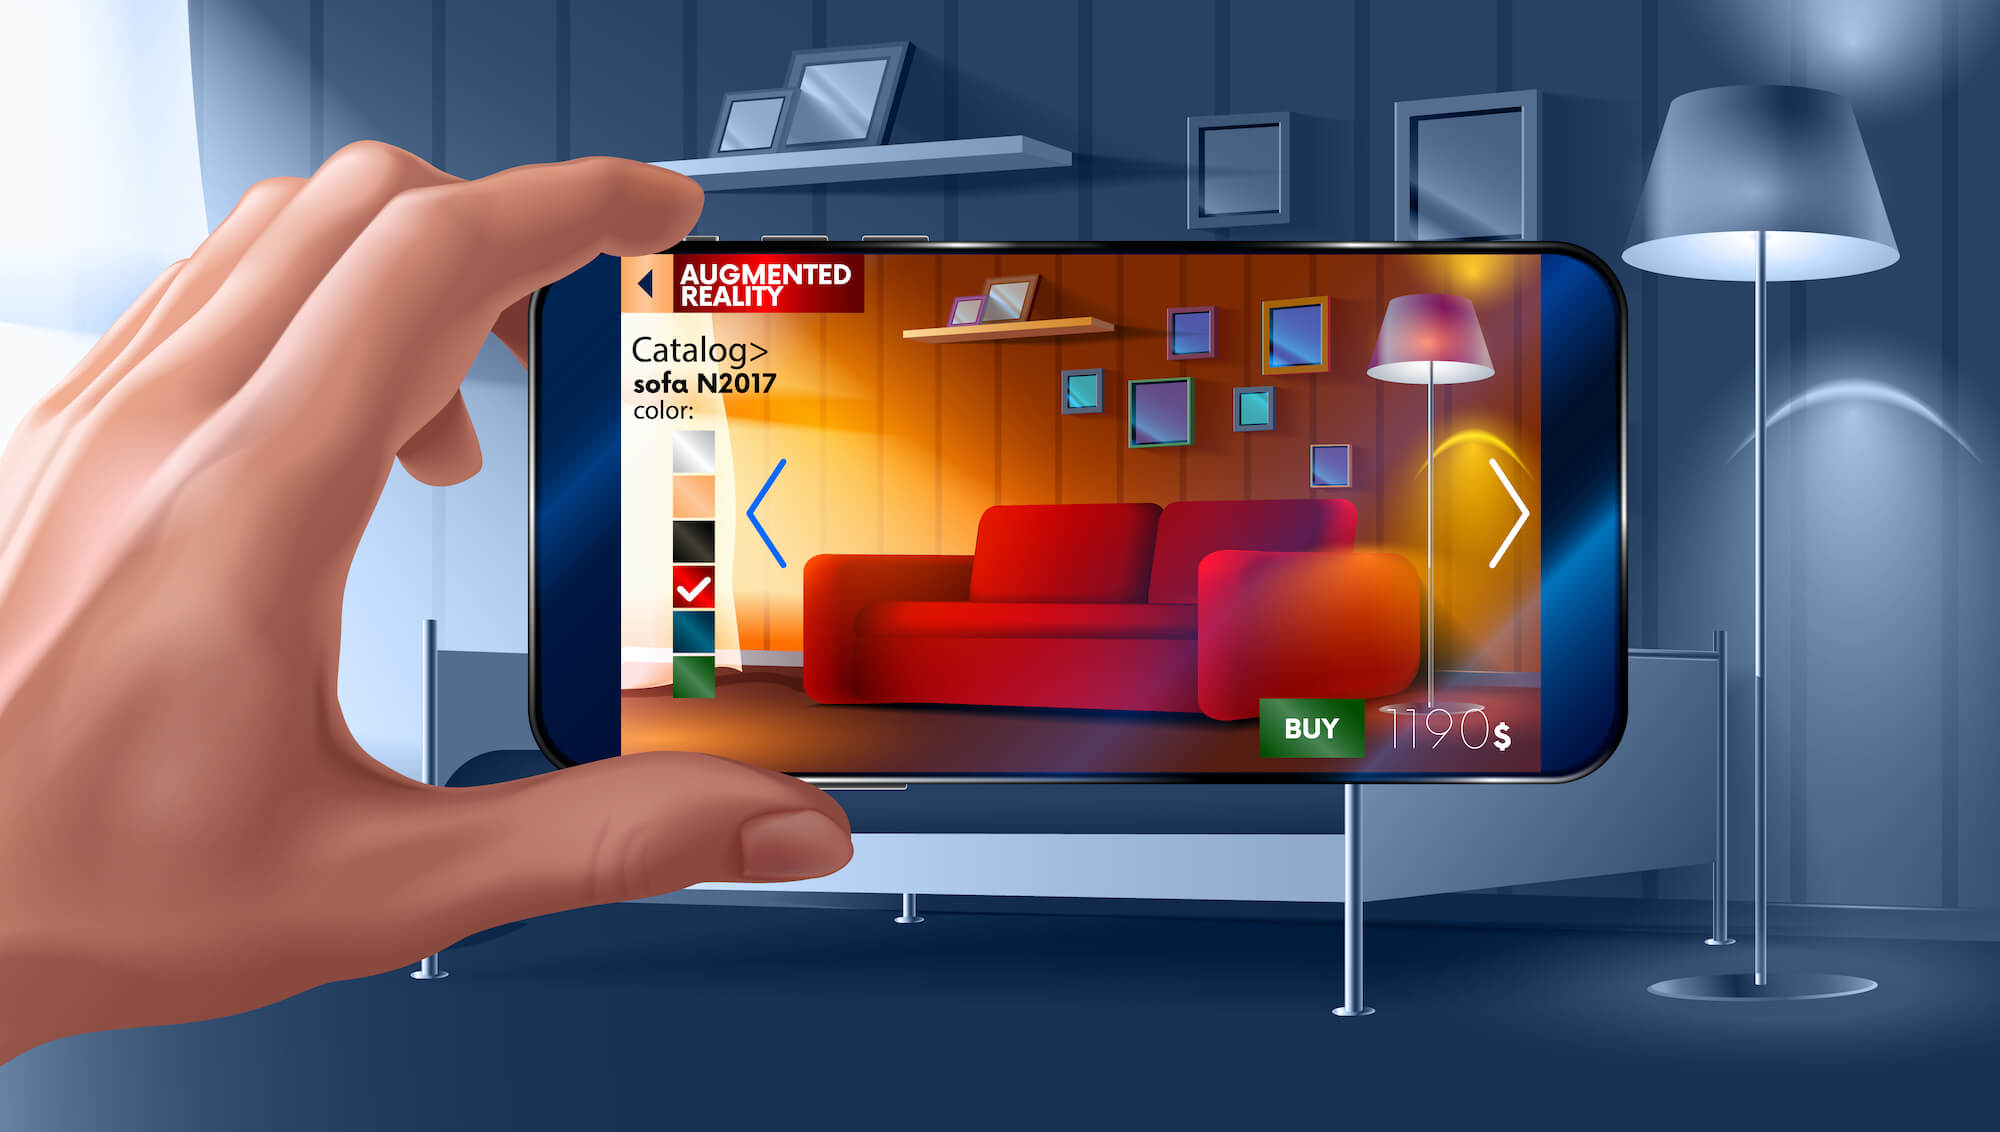 Mobile Augmented Reality: Expanding the Power of the Smartphone